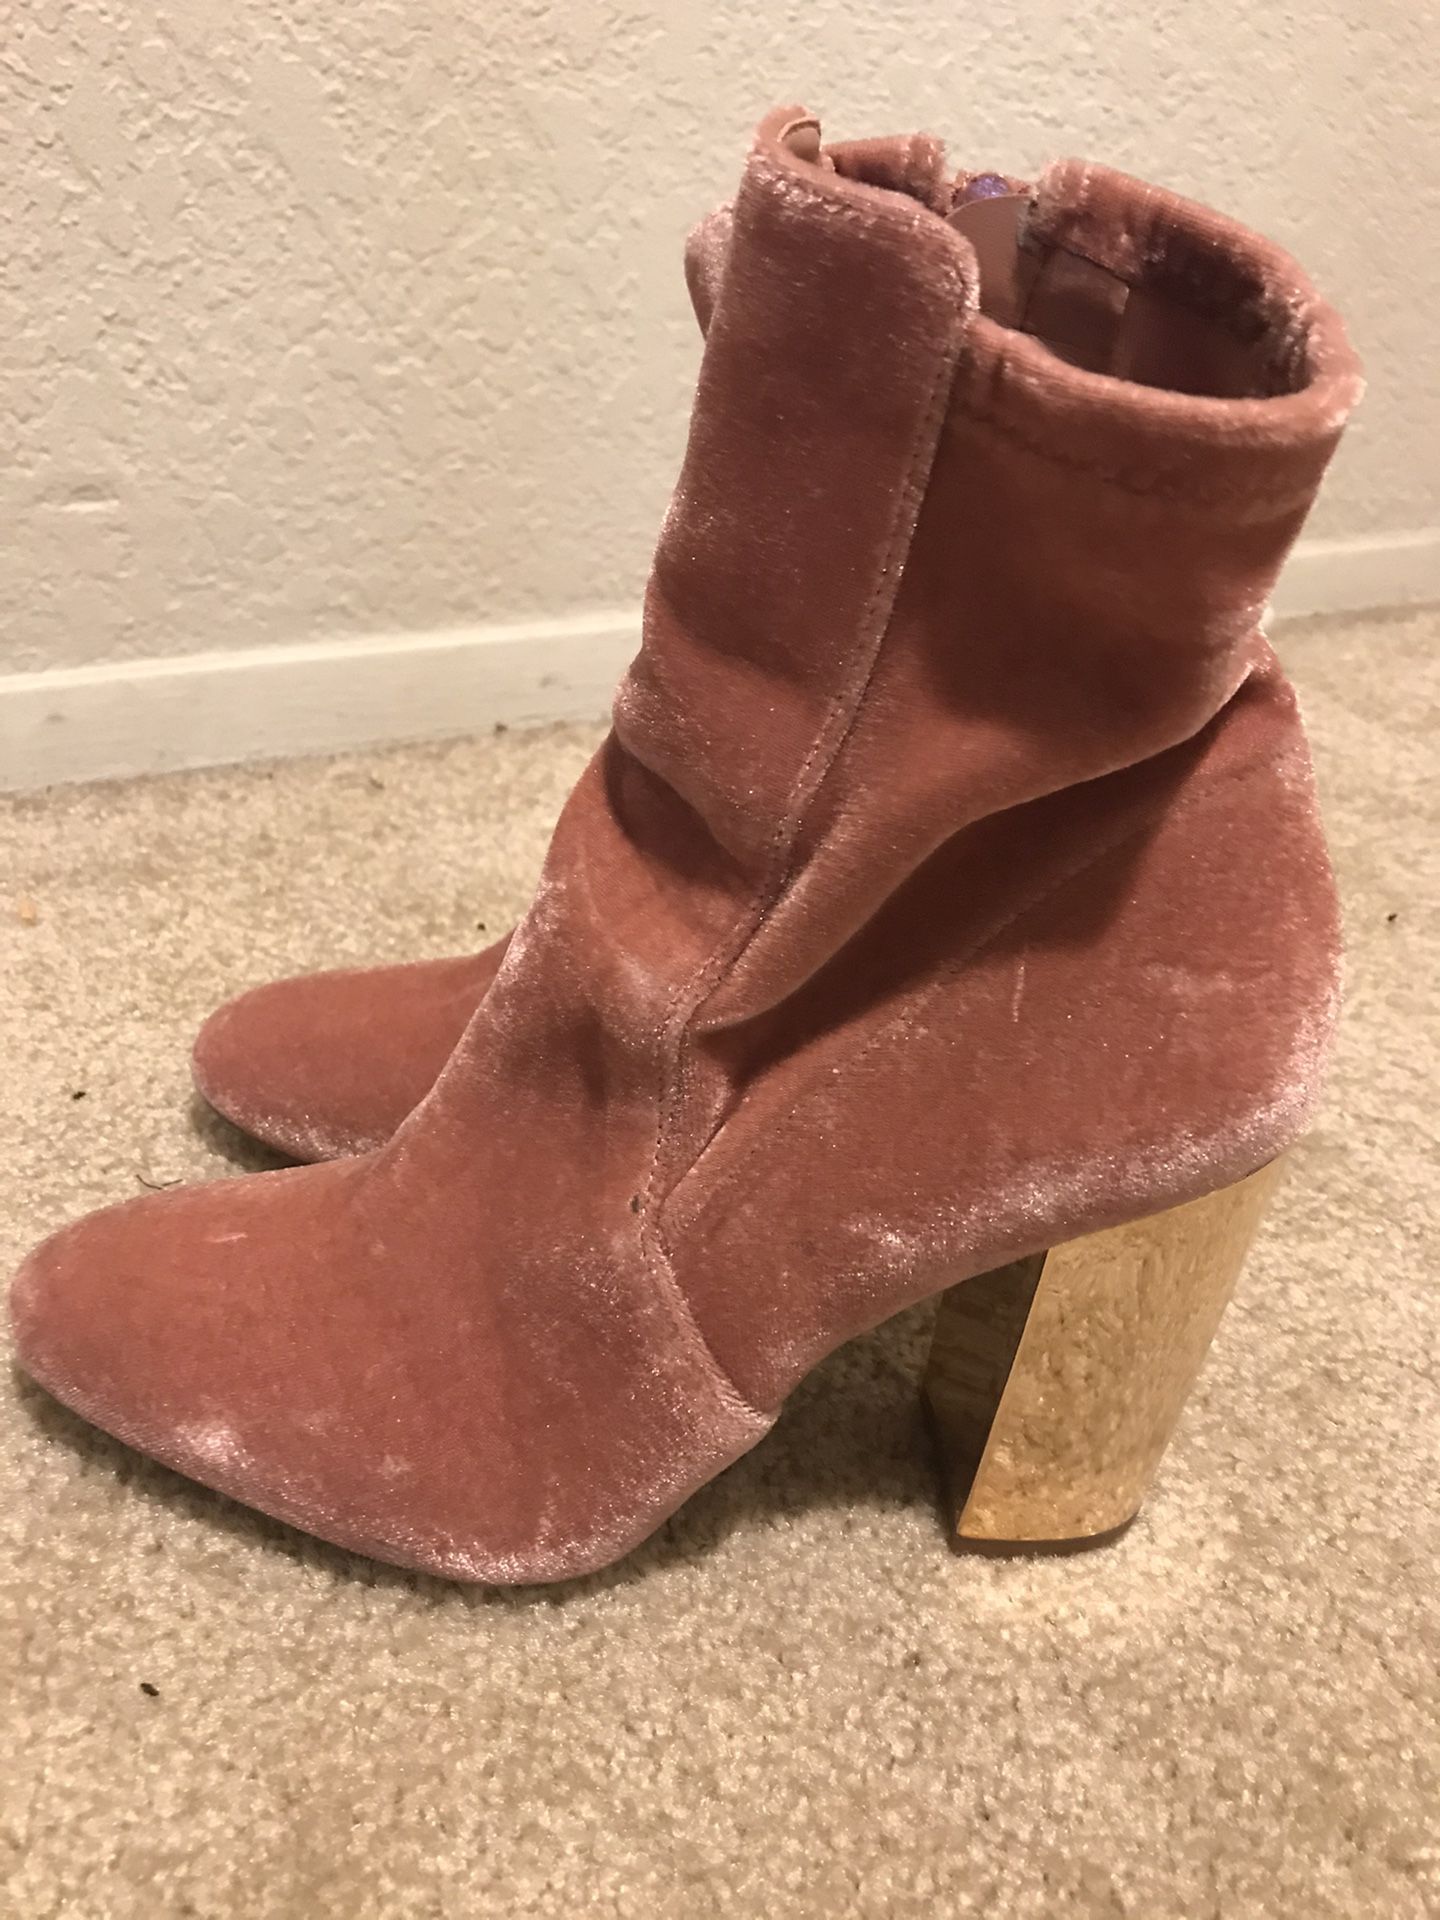 ALDO boots size 7, new - salmon colored with gold heels!!